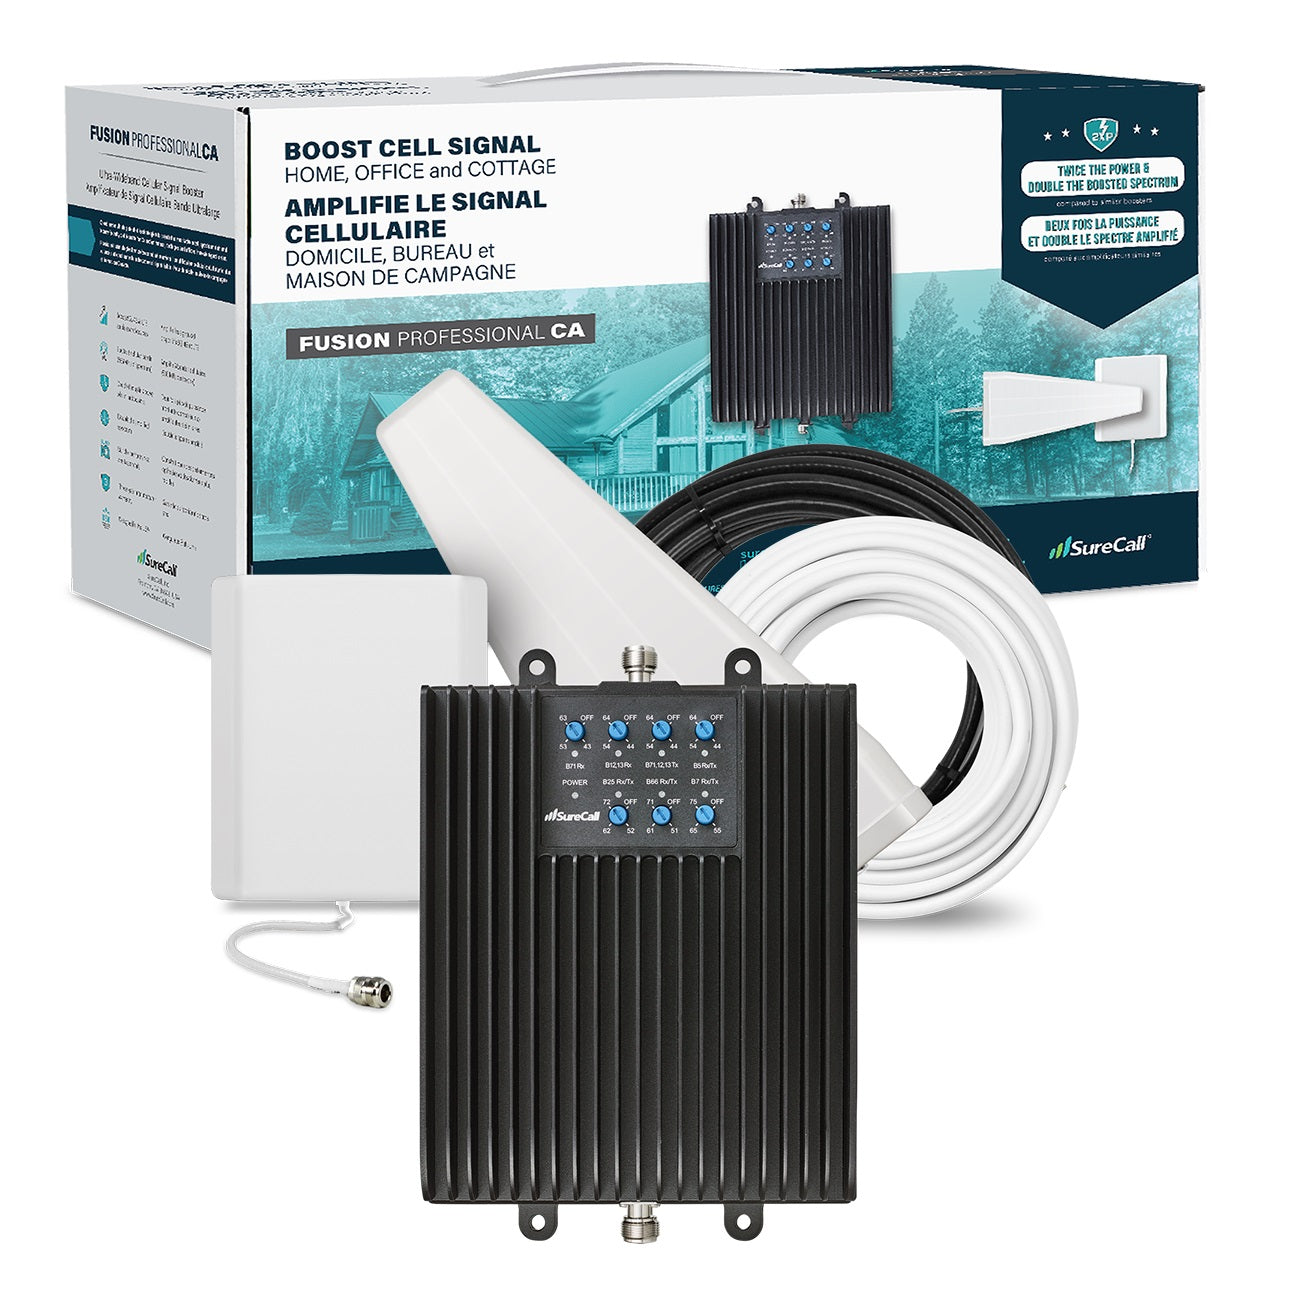 SureCall Fusion Professional 2.0 Cell Phone Signal Booster | Boosts 5G/4G LTE for All Canadian Carriers, ISED Approved, USA Company